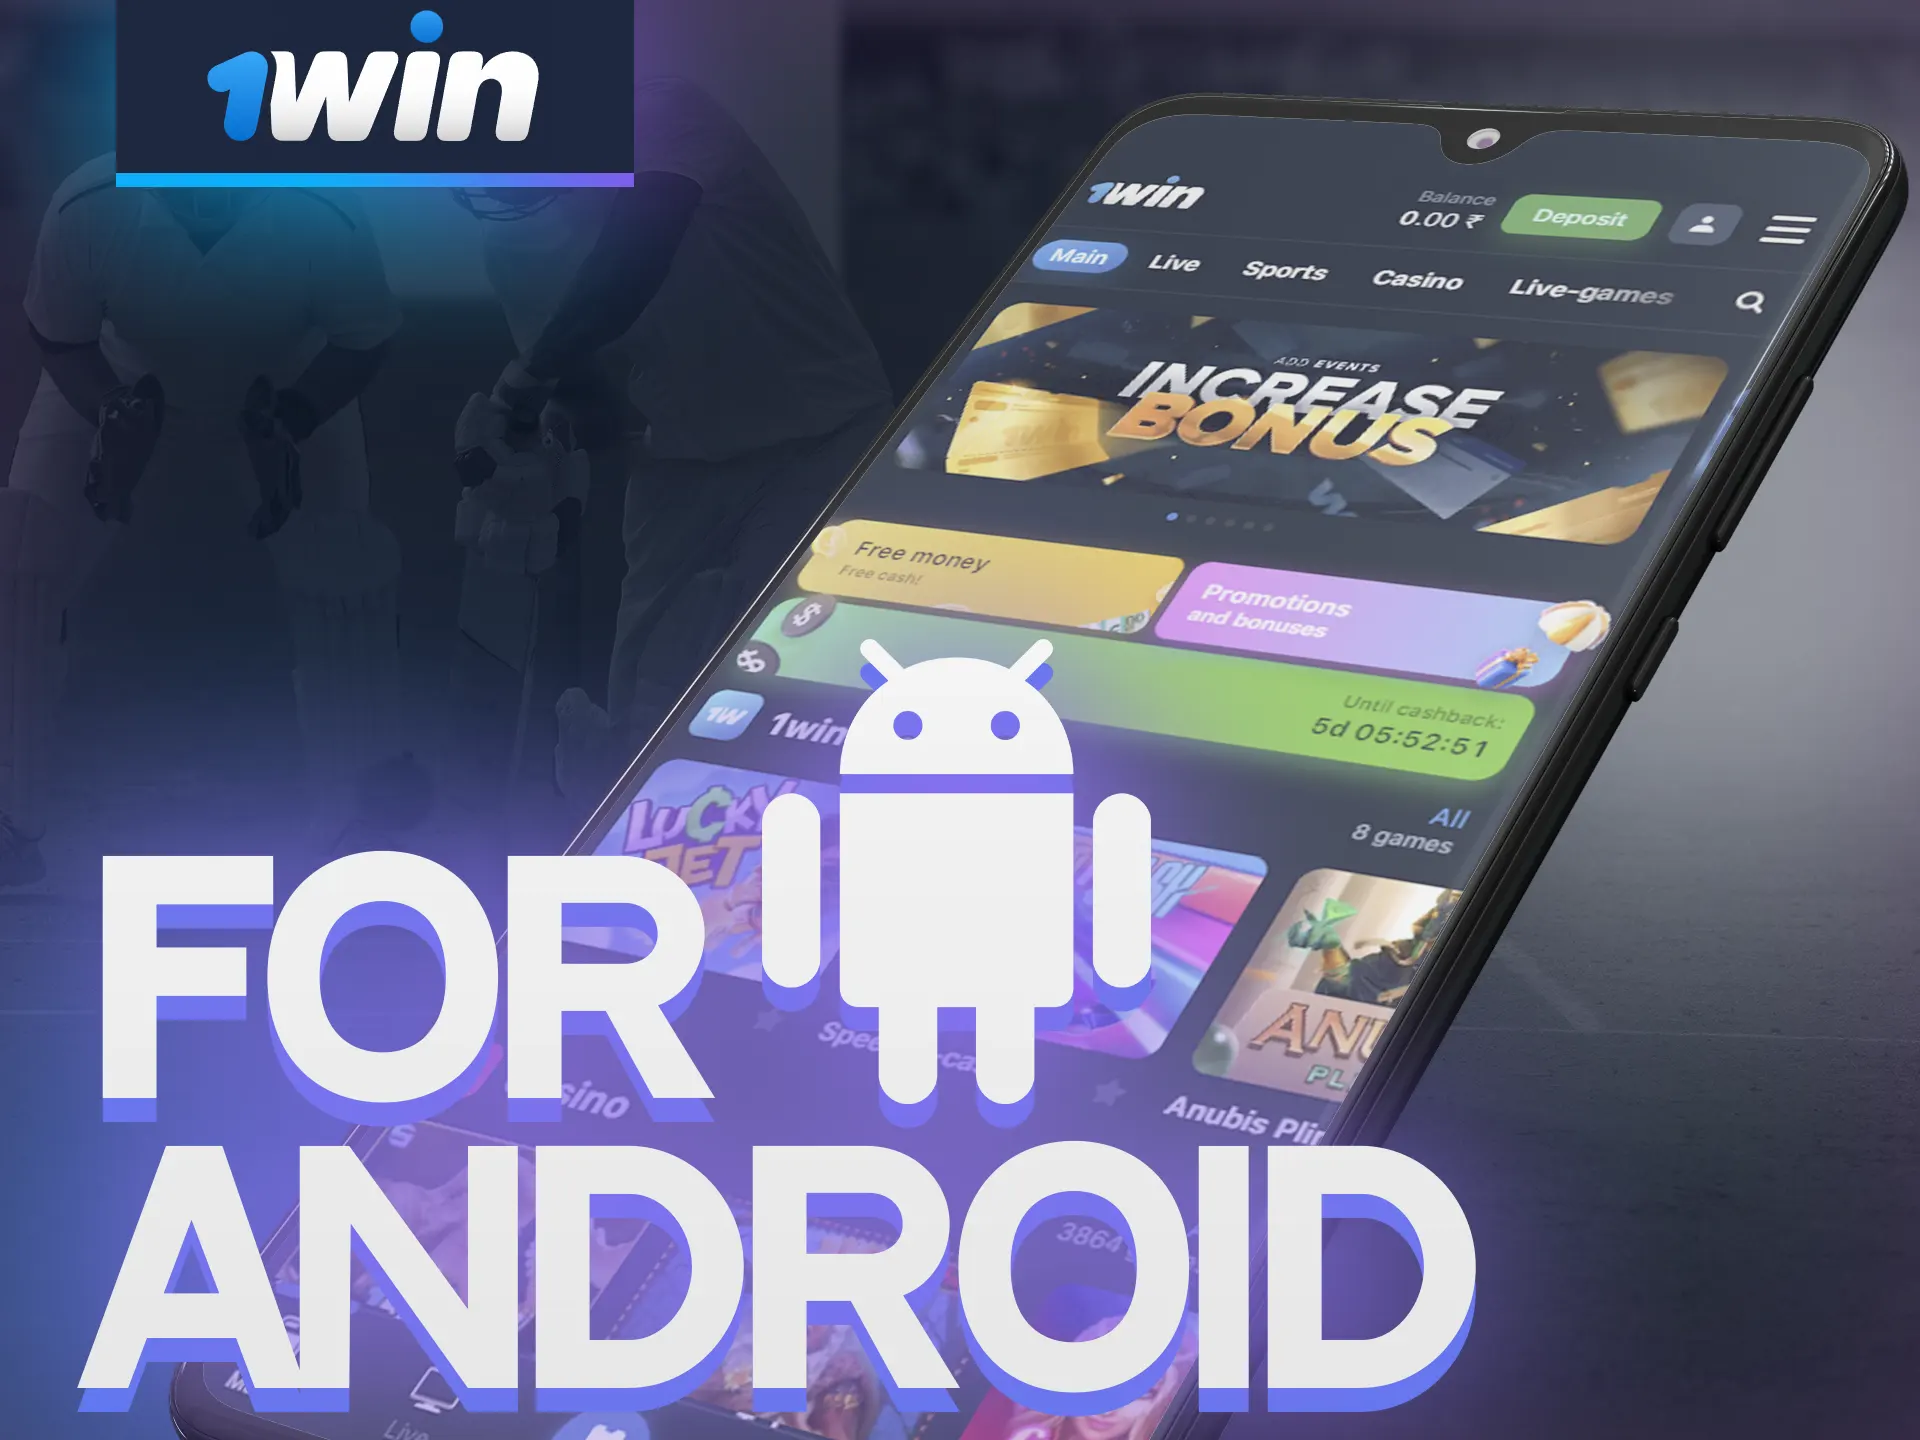 You can place bets directly from your Android device through the special 1win app.